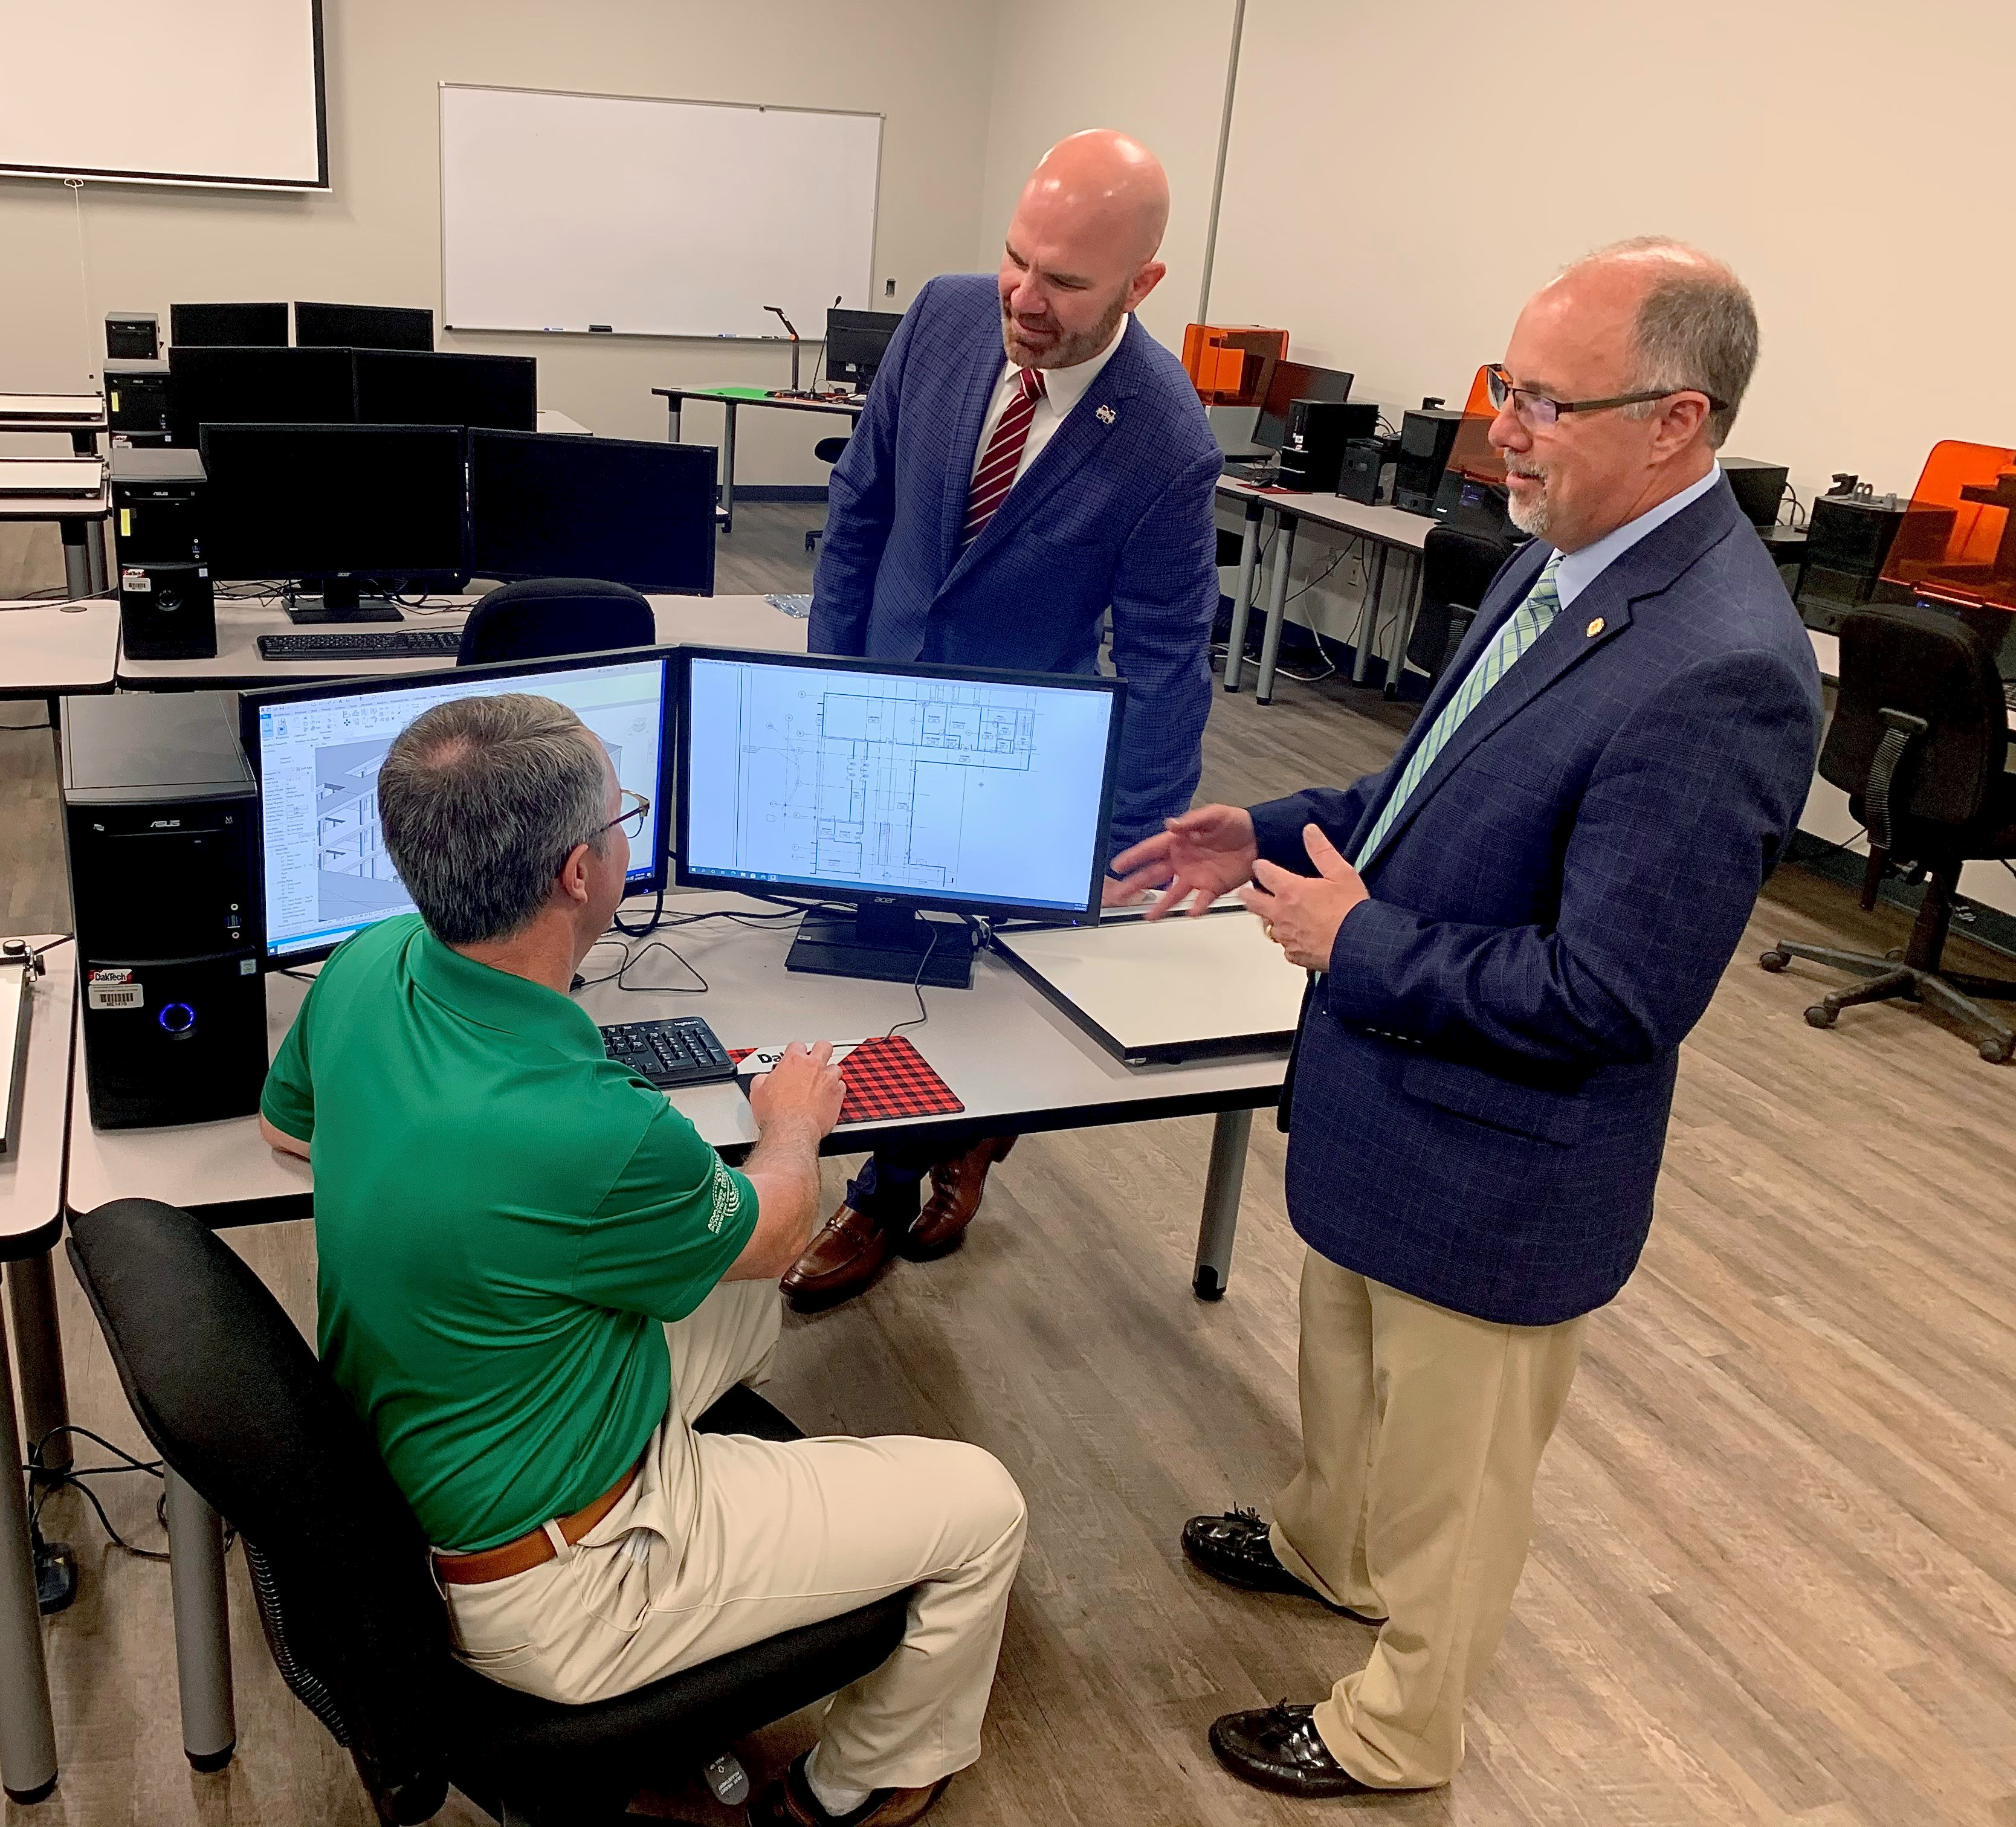 Stewart Brown (l), program coordinator and instructor for MCC's 3D CAD Engineering shows MCC president Tom Huebner (right) and Terry Dale Cruse, associate vice president and head of campus at MSU-Meridian some computer software used in h 